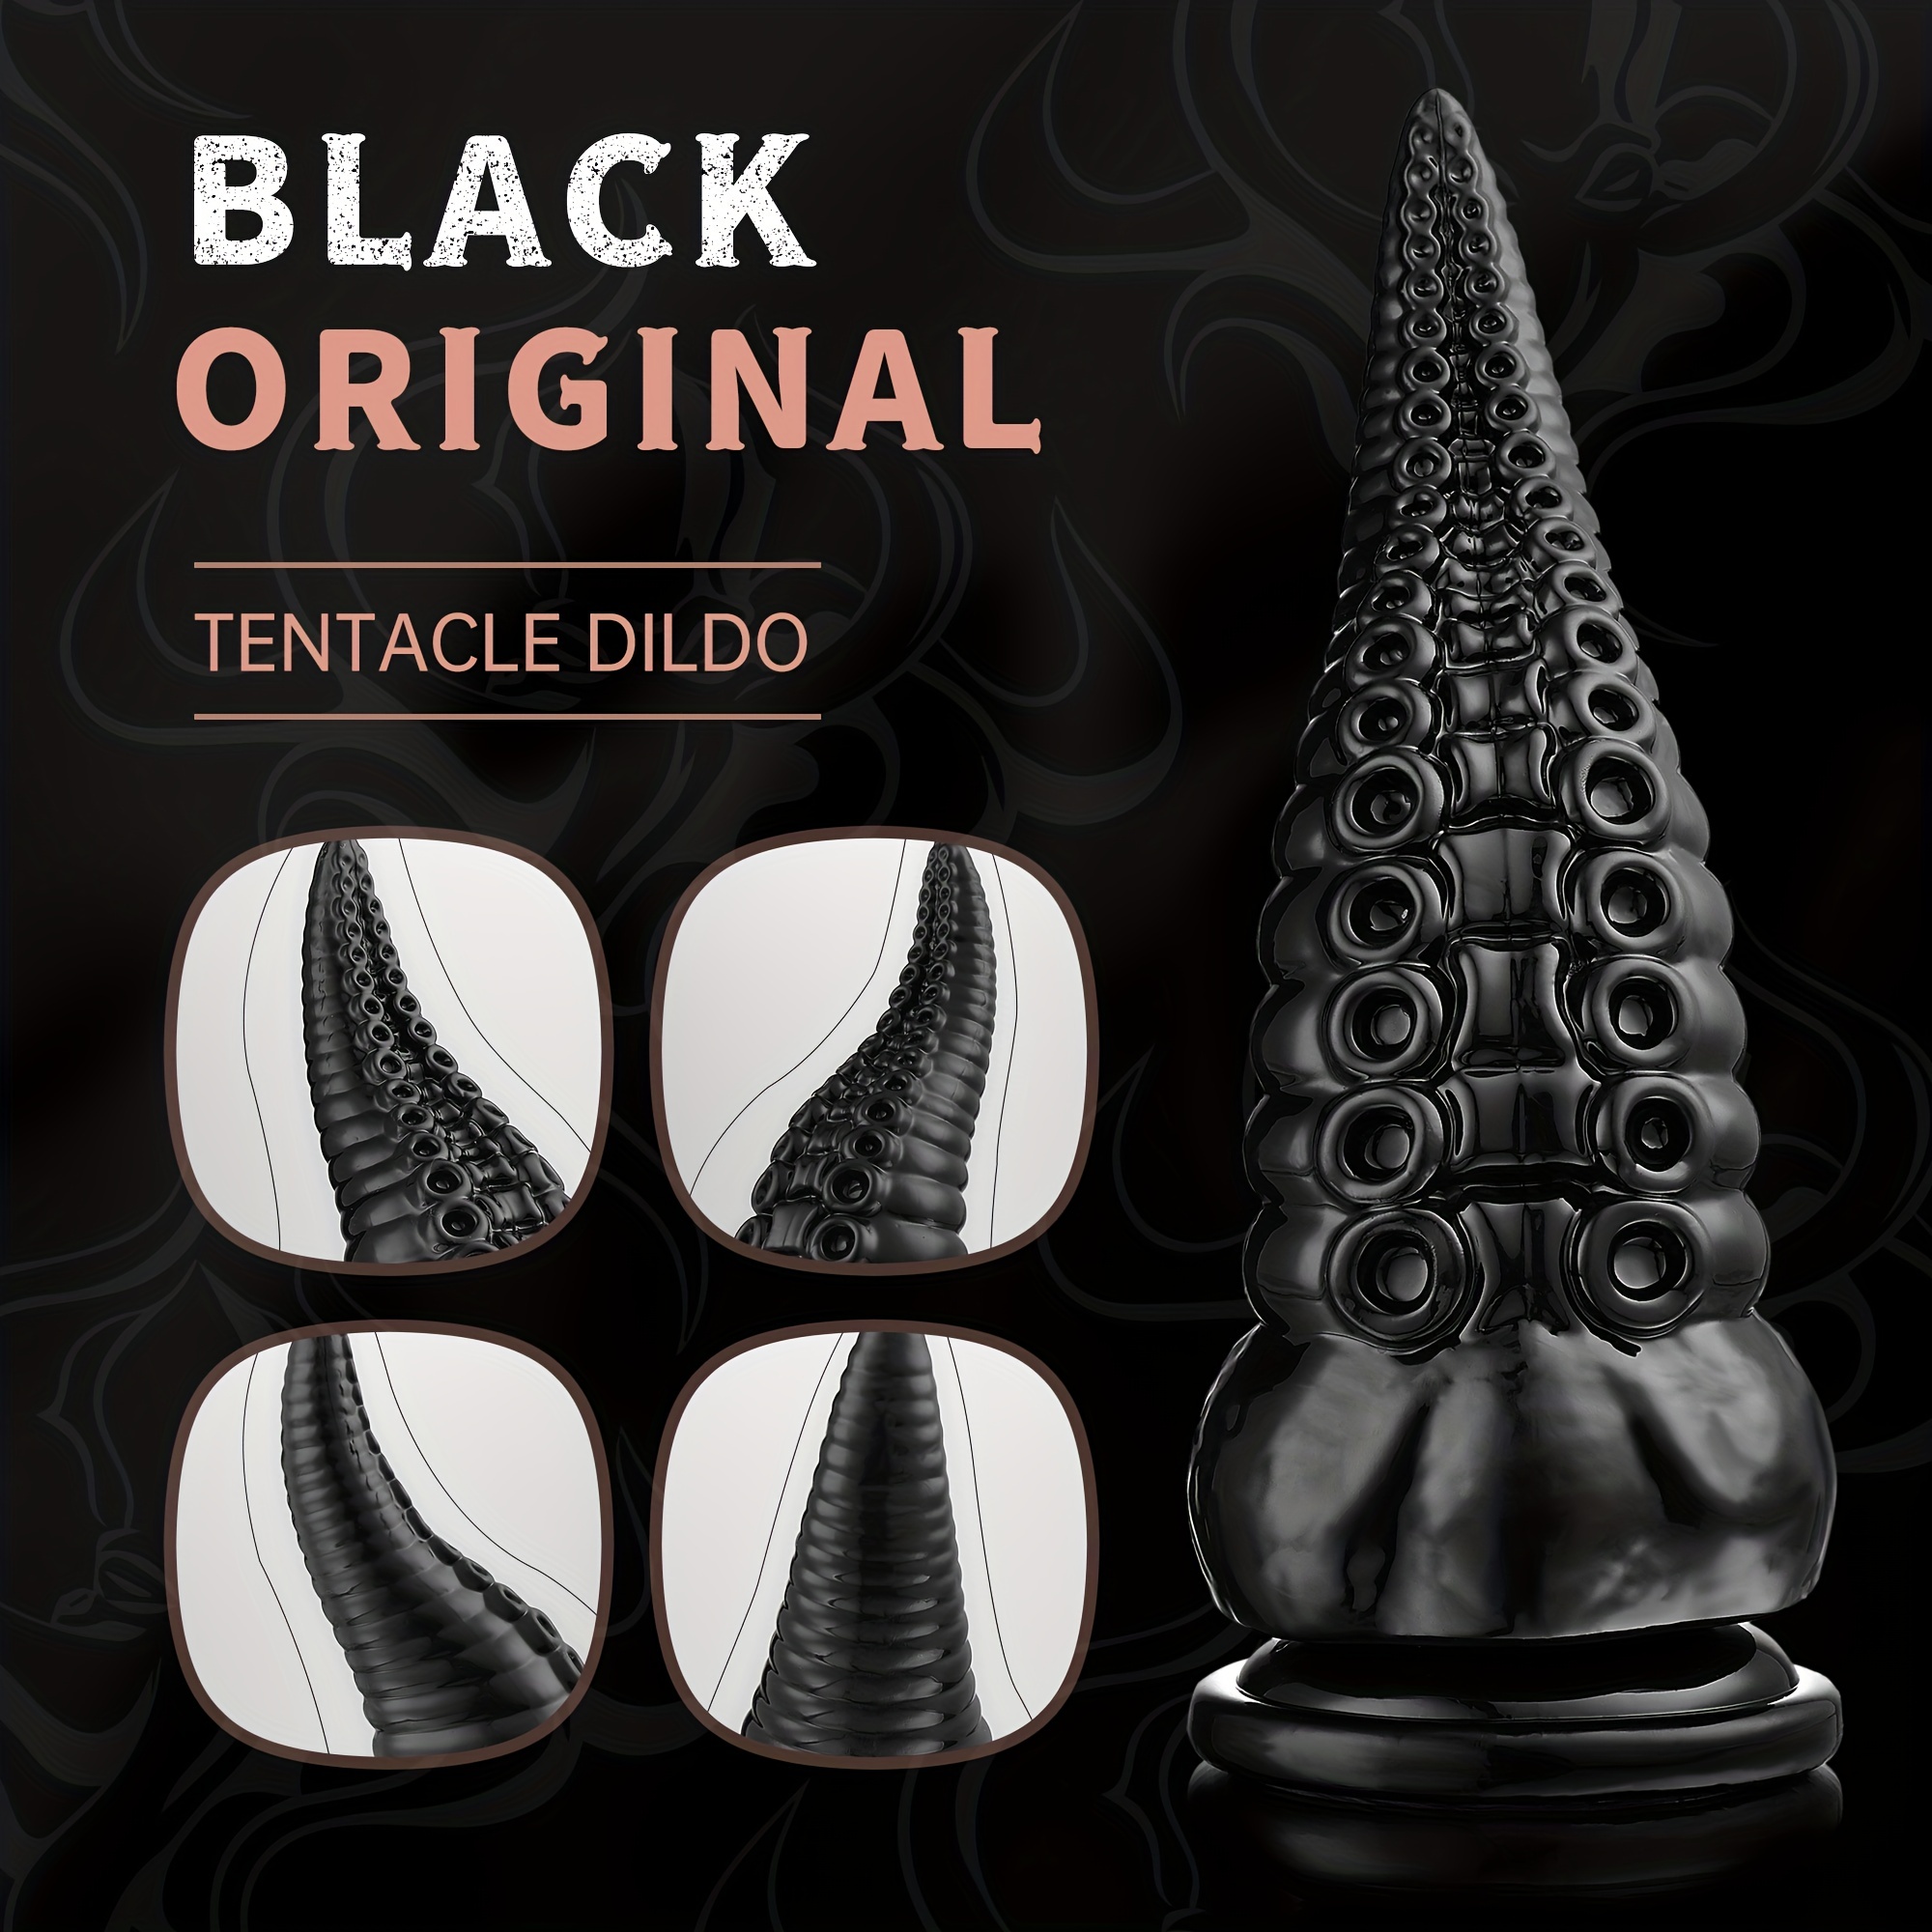 Experience Deep Throat Sex With This Realistic Tentacle Dildo - G Spot, Dragon, and G-spot Training Toys For Men and Women